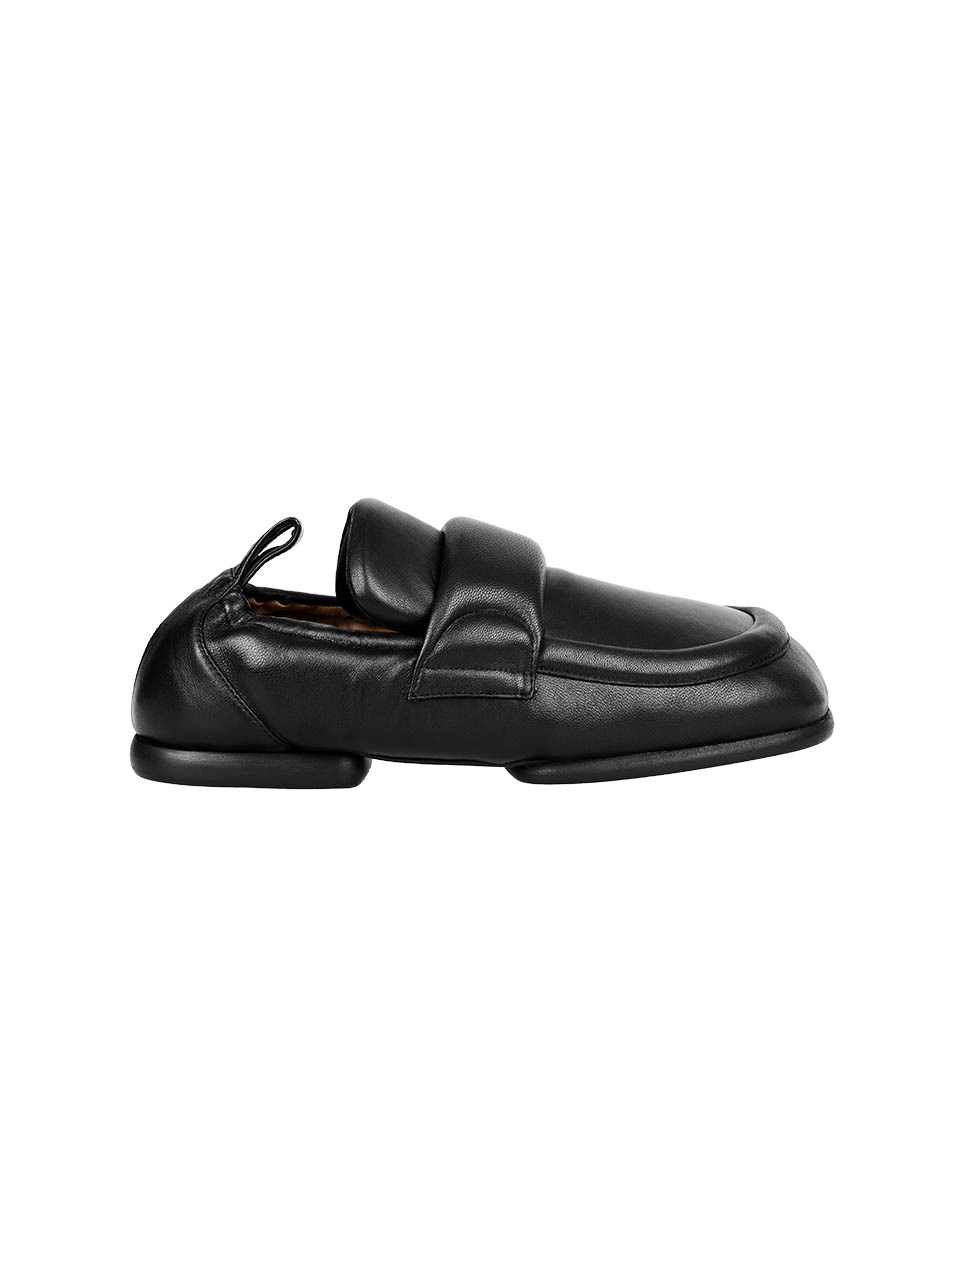 DRIES VAN NOTEN - PADDED LEATHER LOAFER (BLACK)